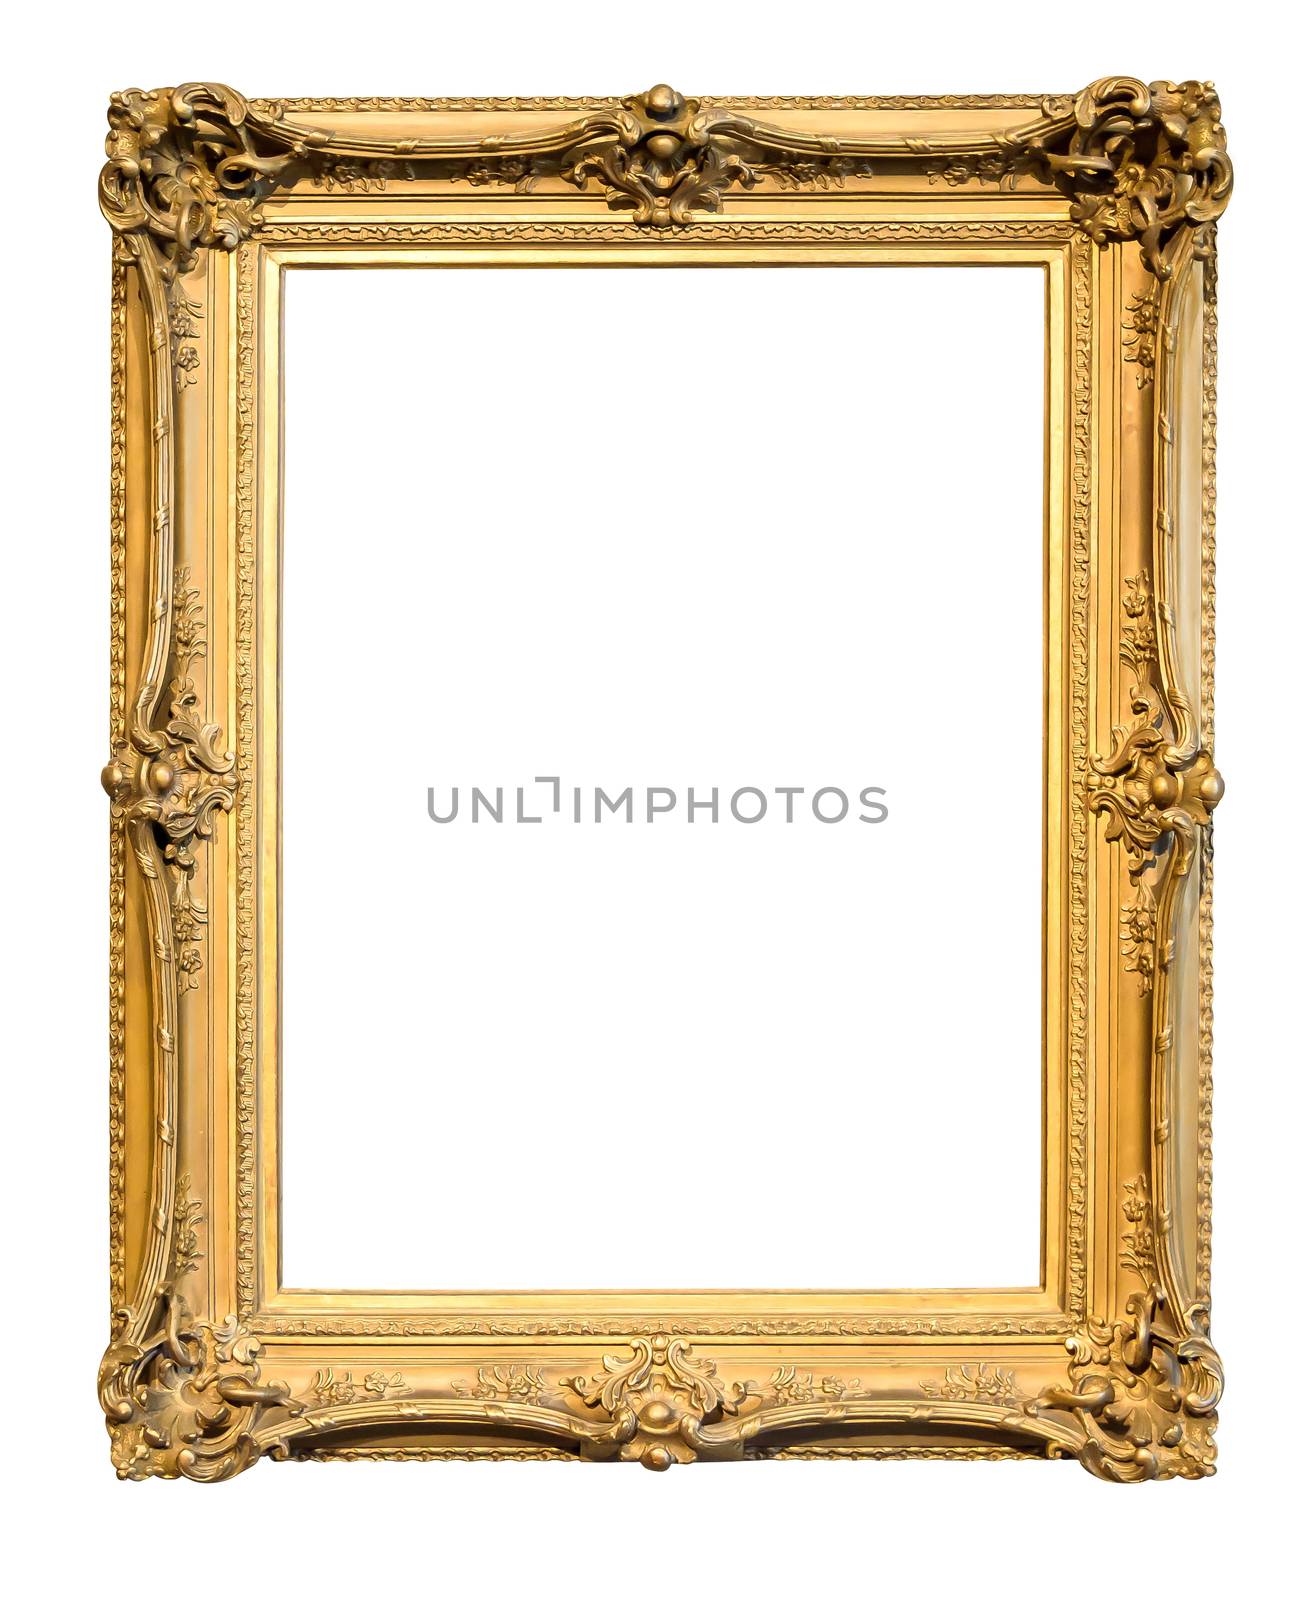 Gold decorative picture frame isolated on white by mkos83